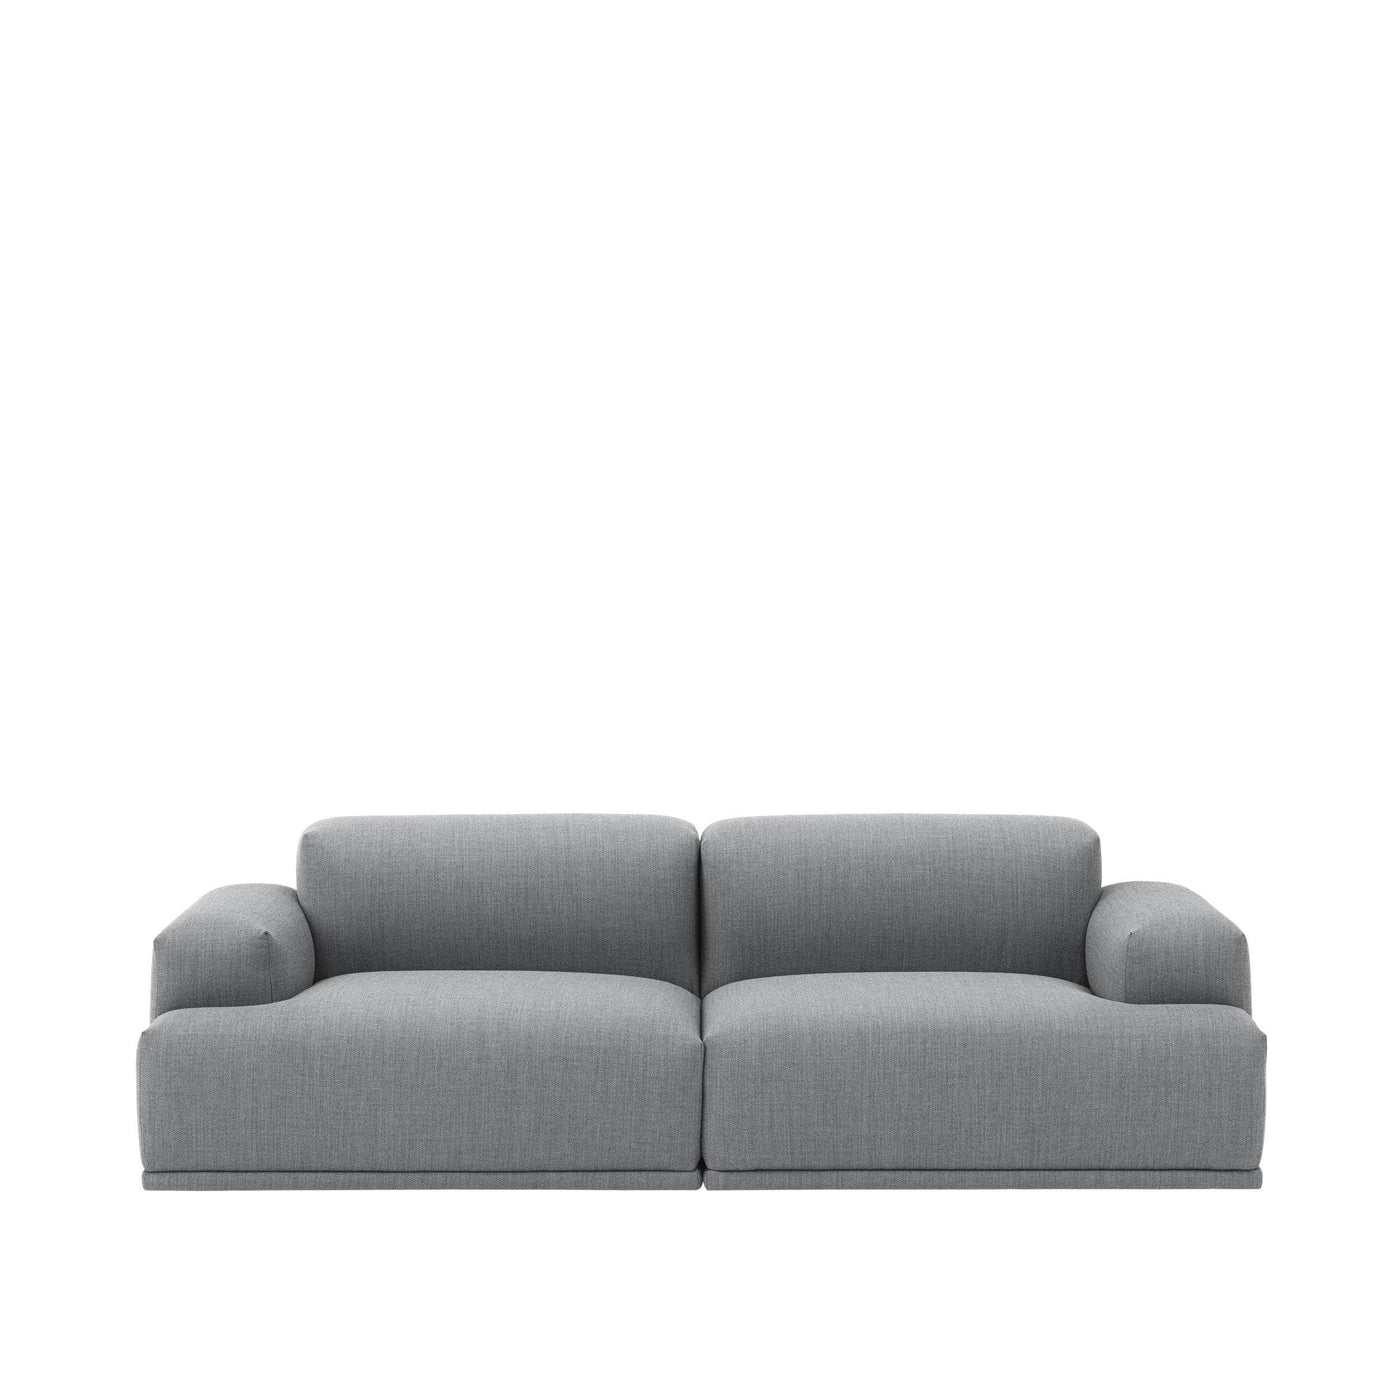 Muuto Connect sofa in Fiord 151 grey. Made to order from someday designs